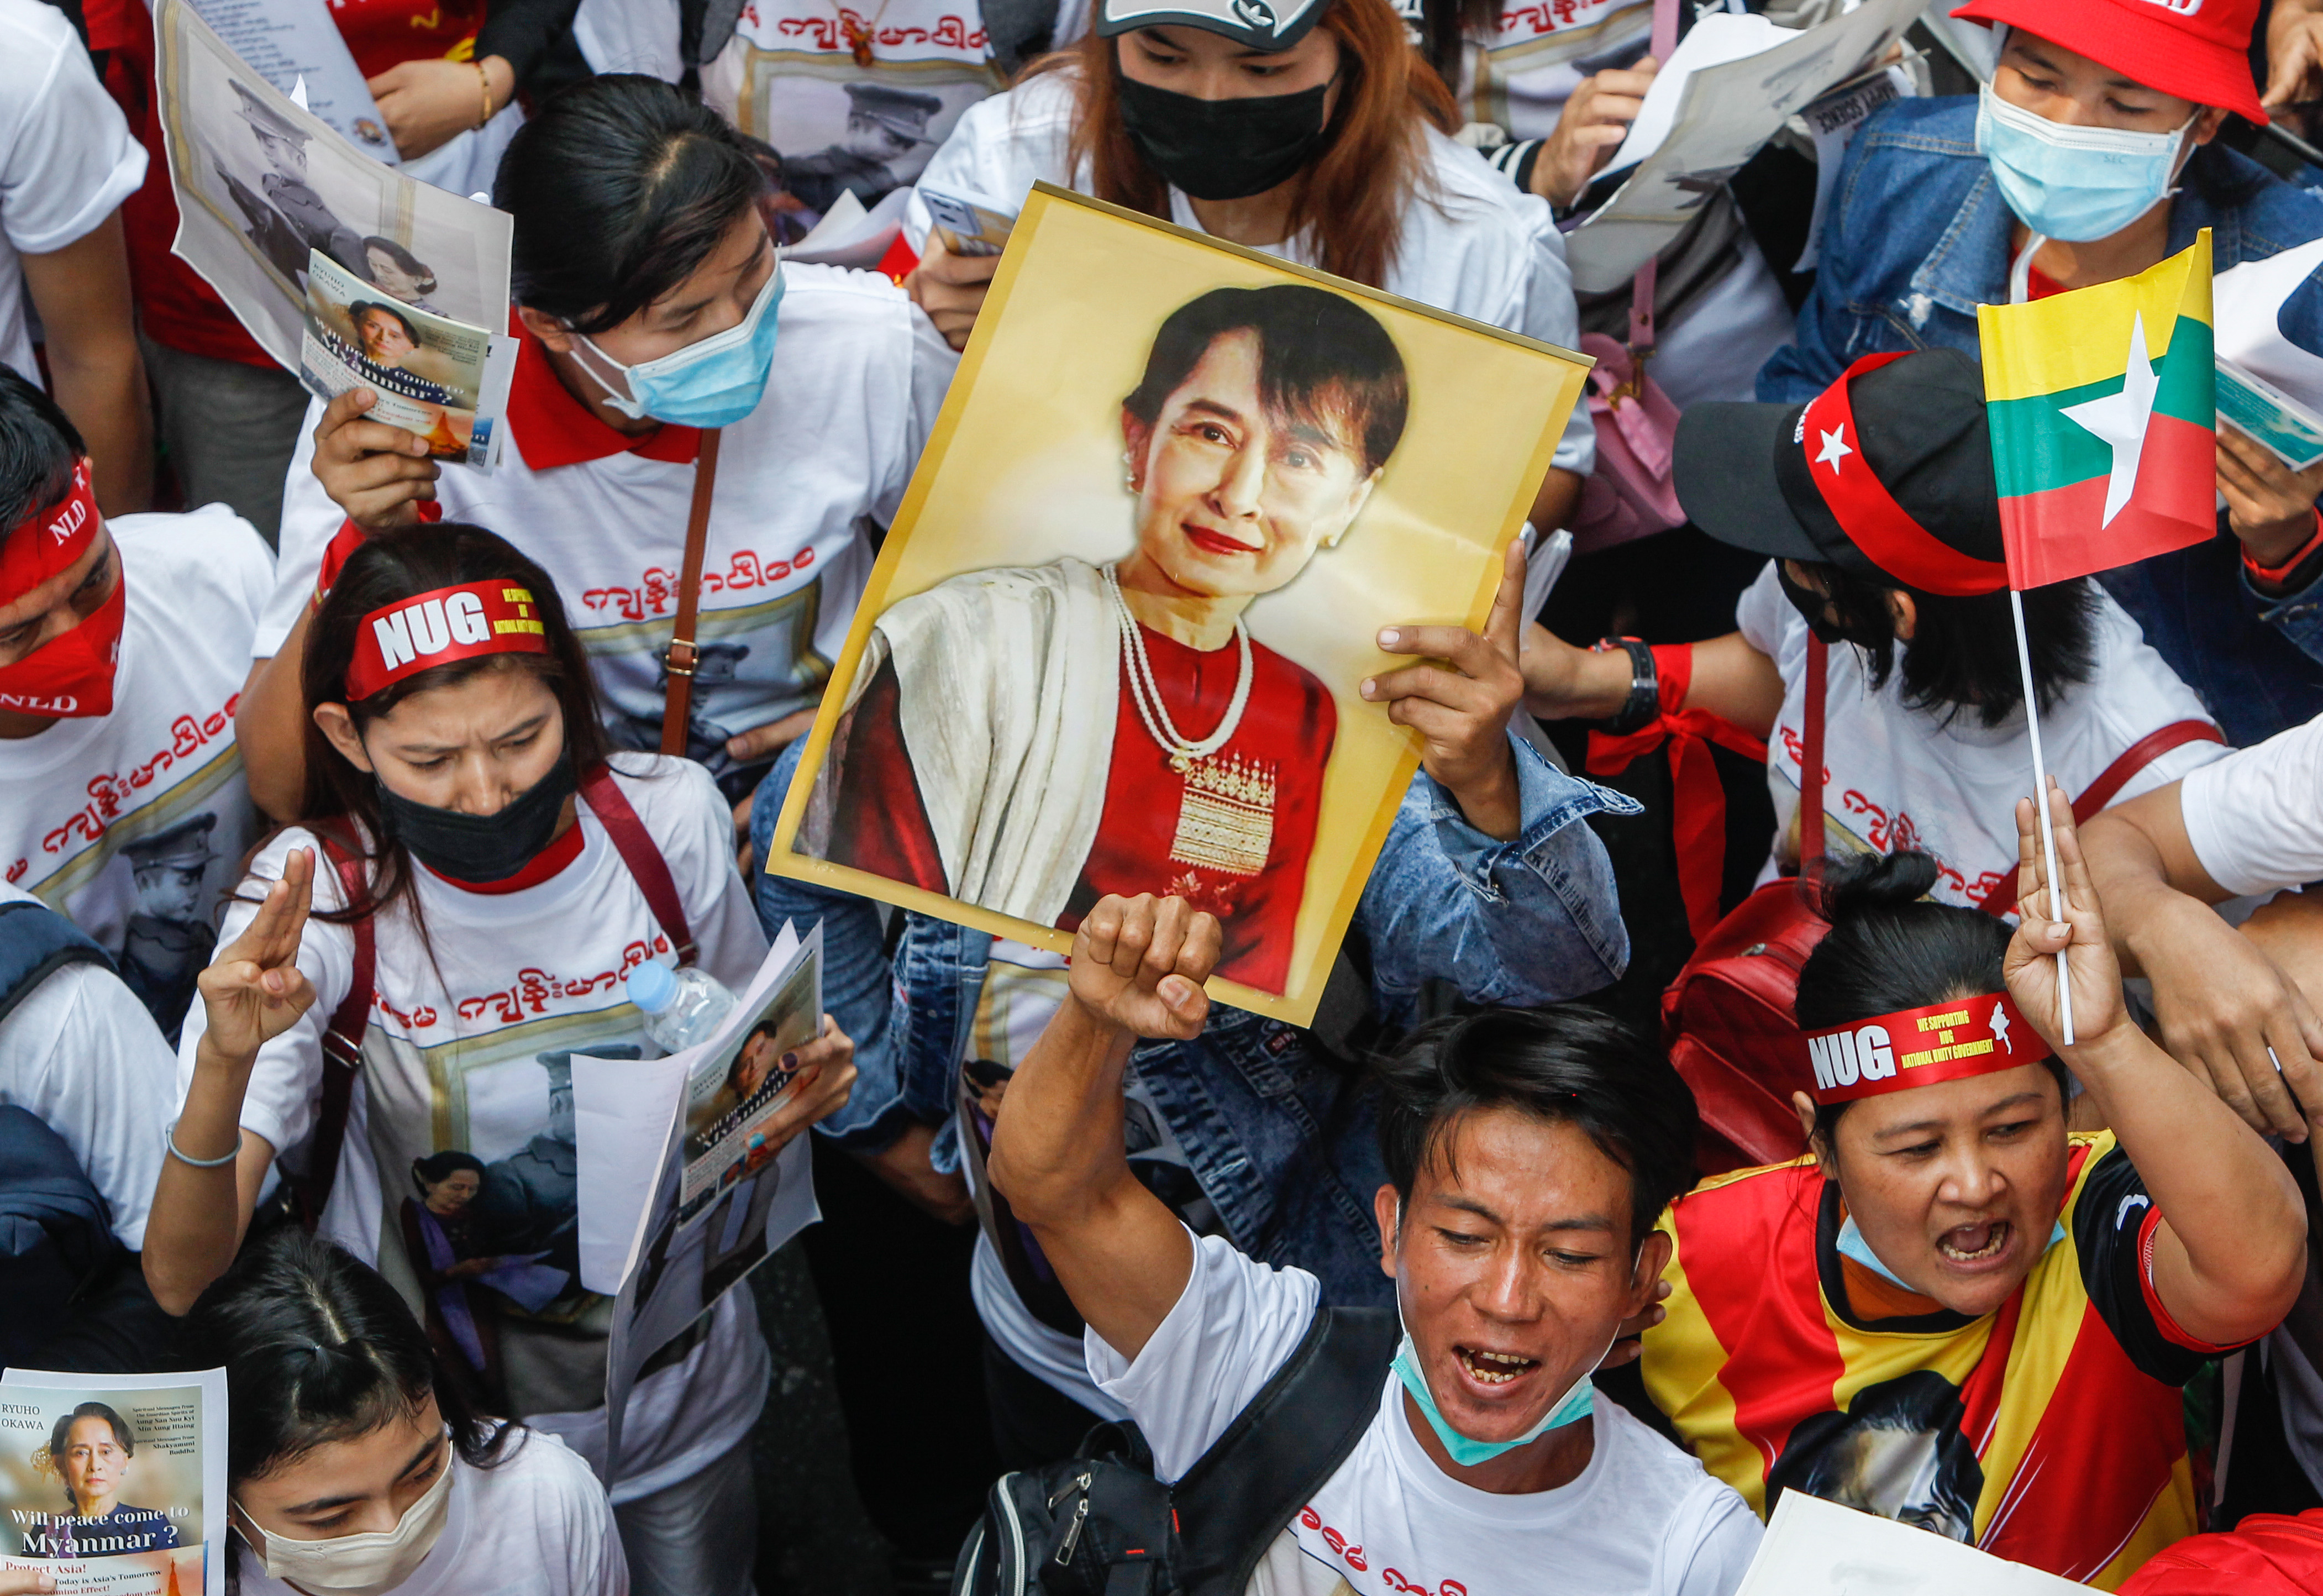 The civil war in Myanmar: No end in sight